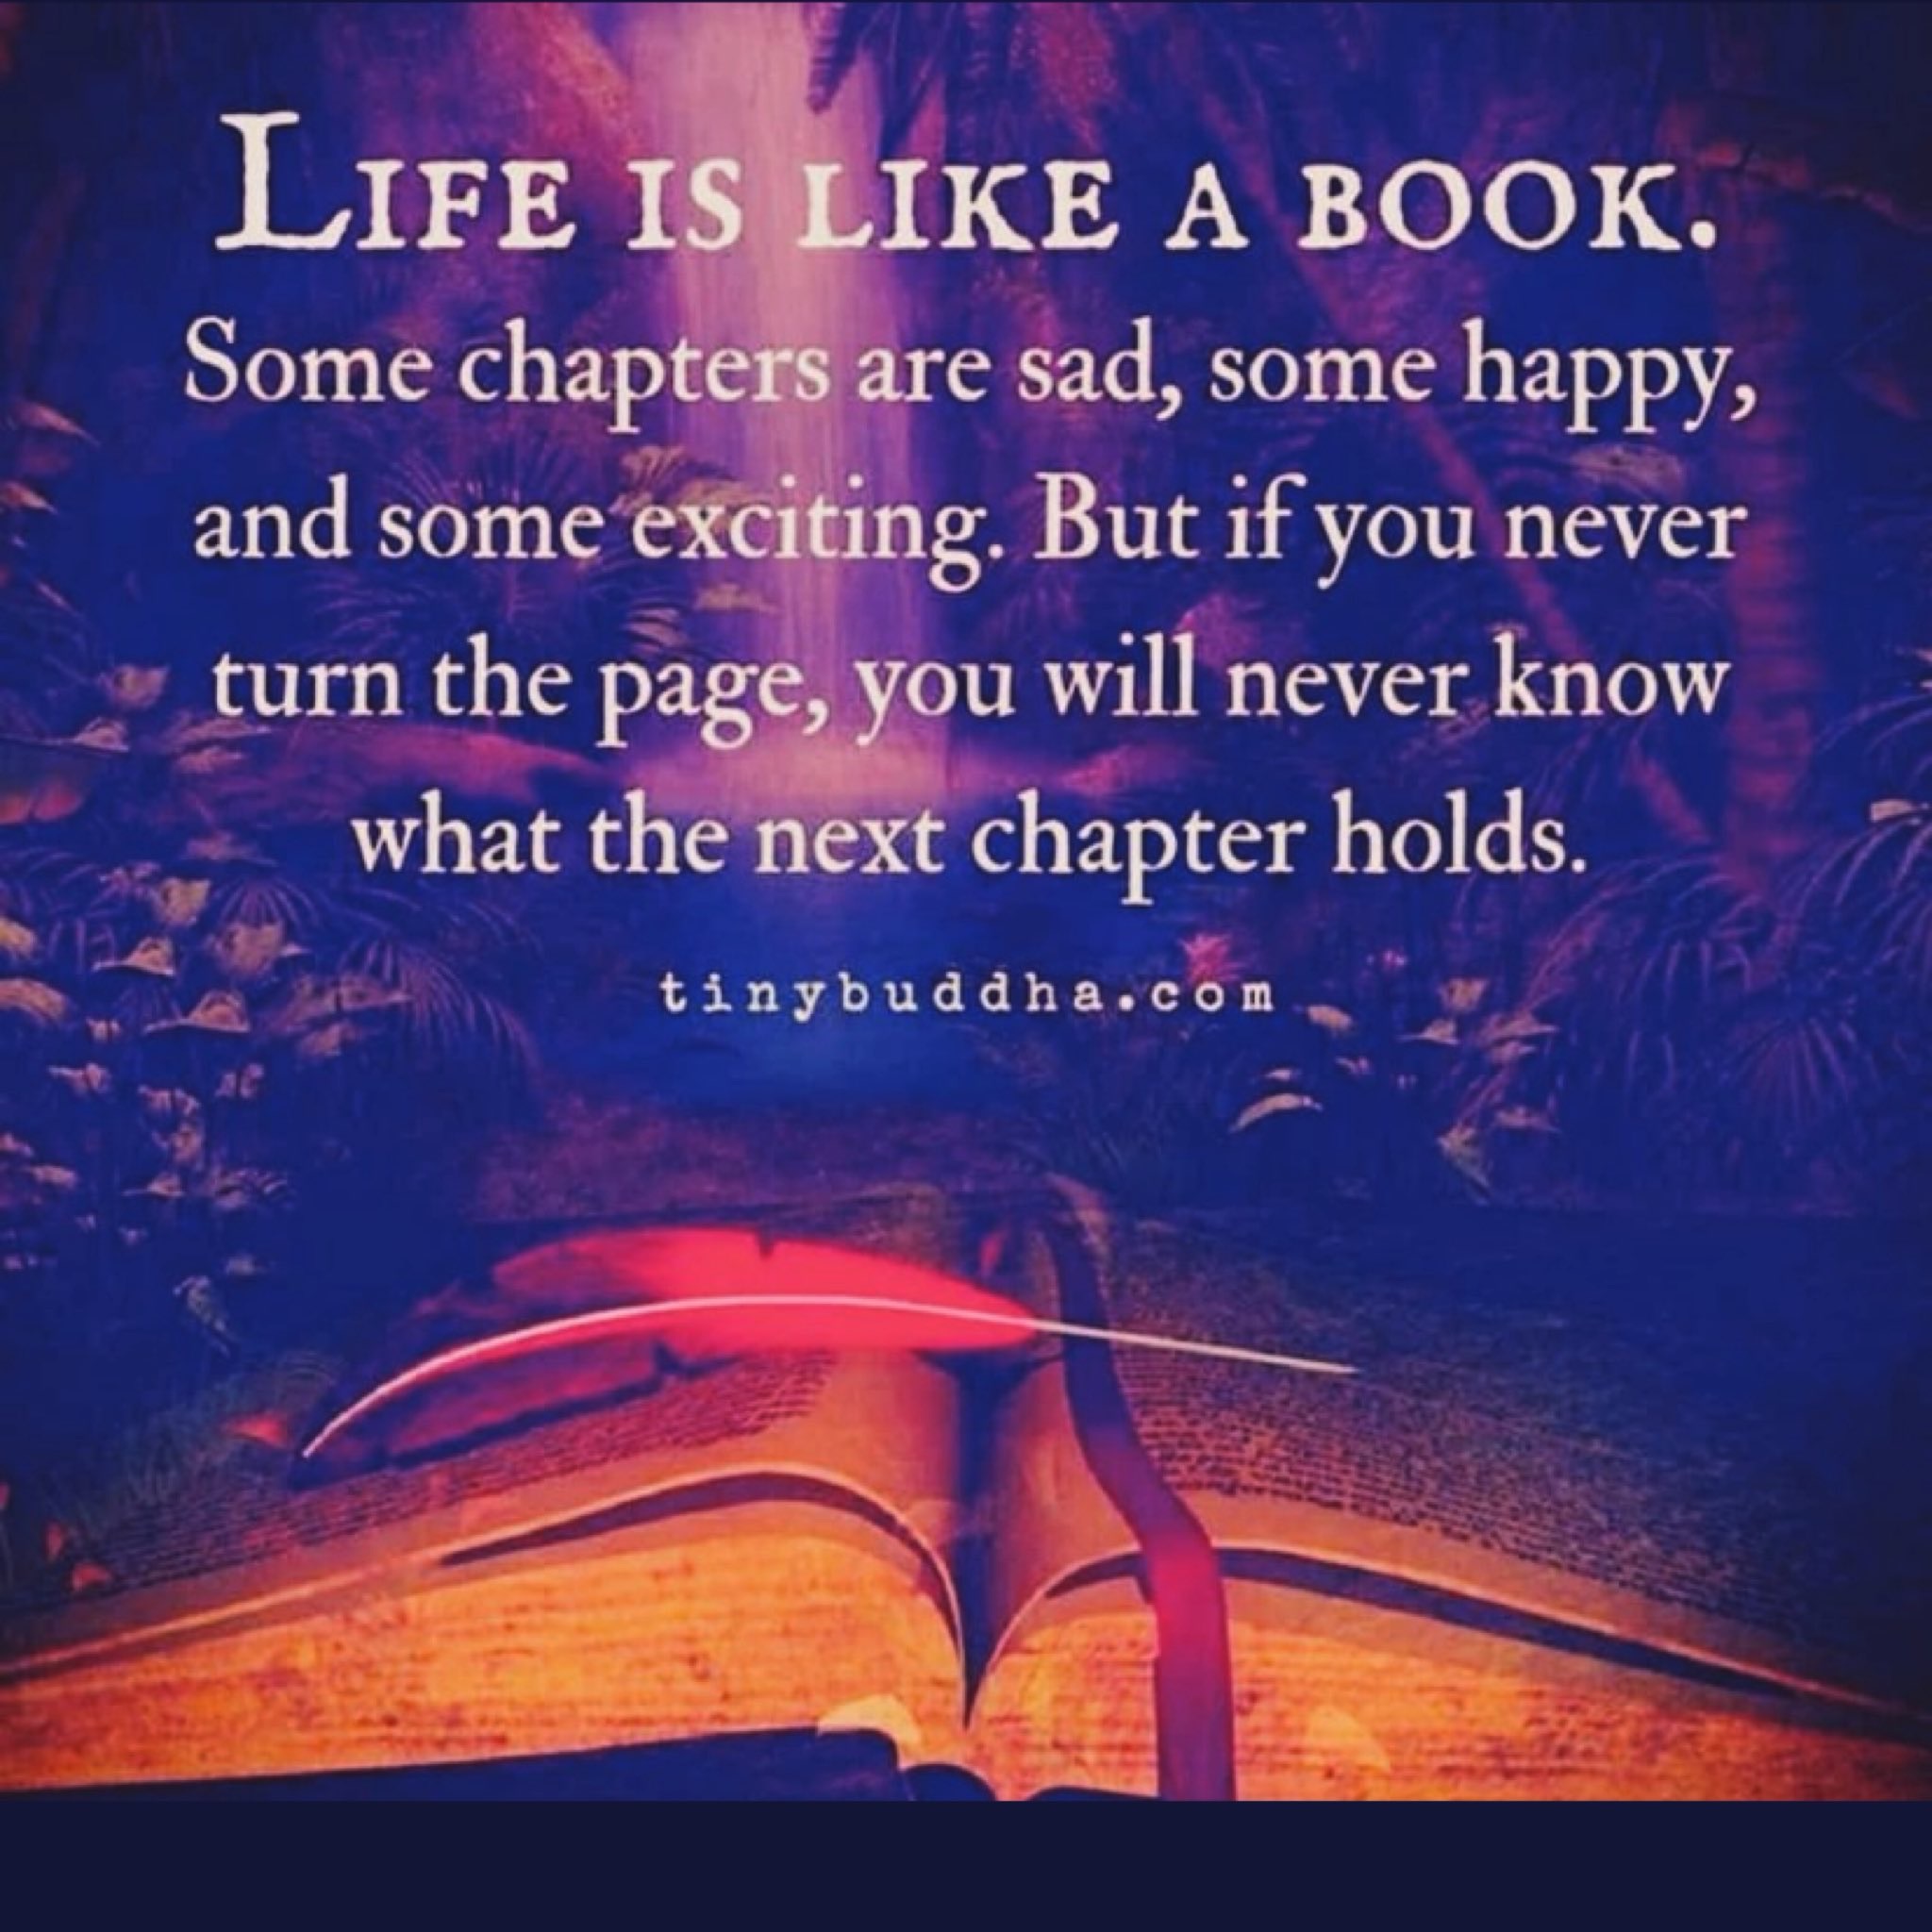 Life is a book